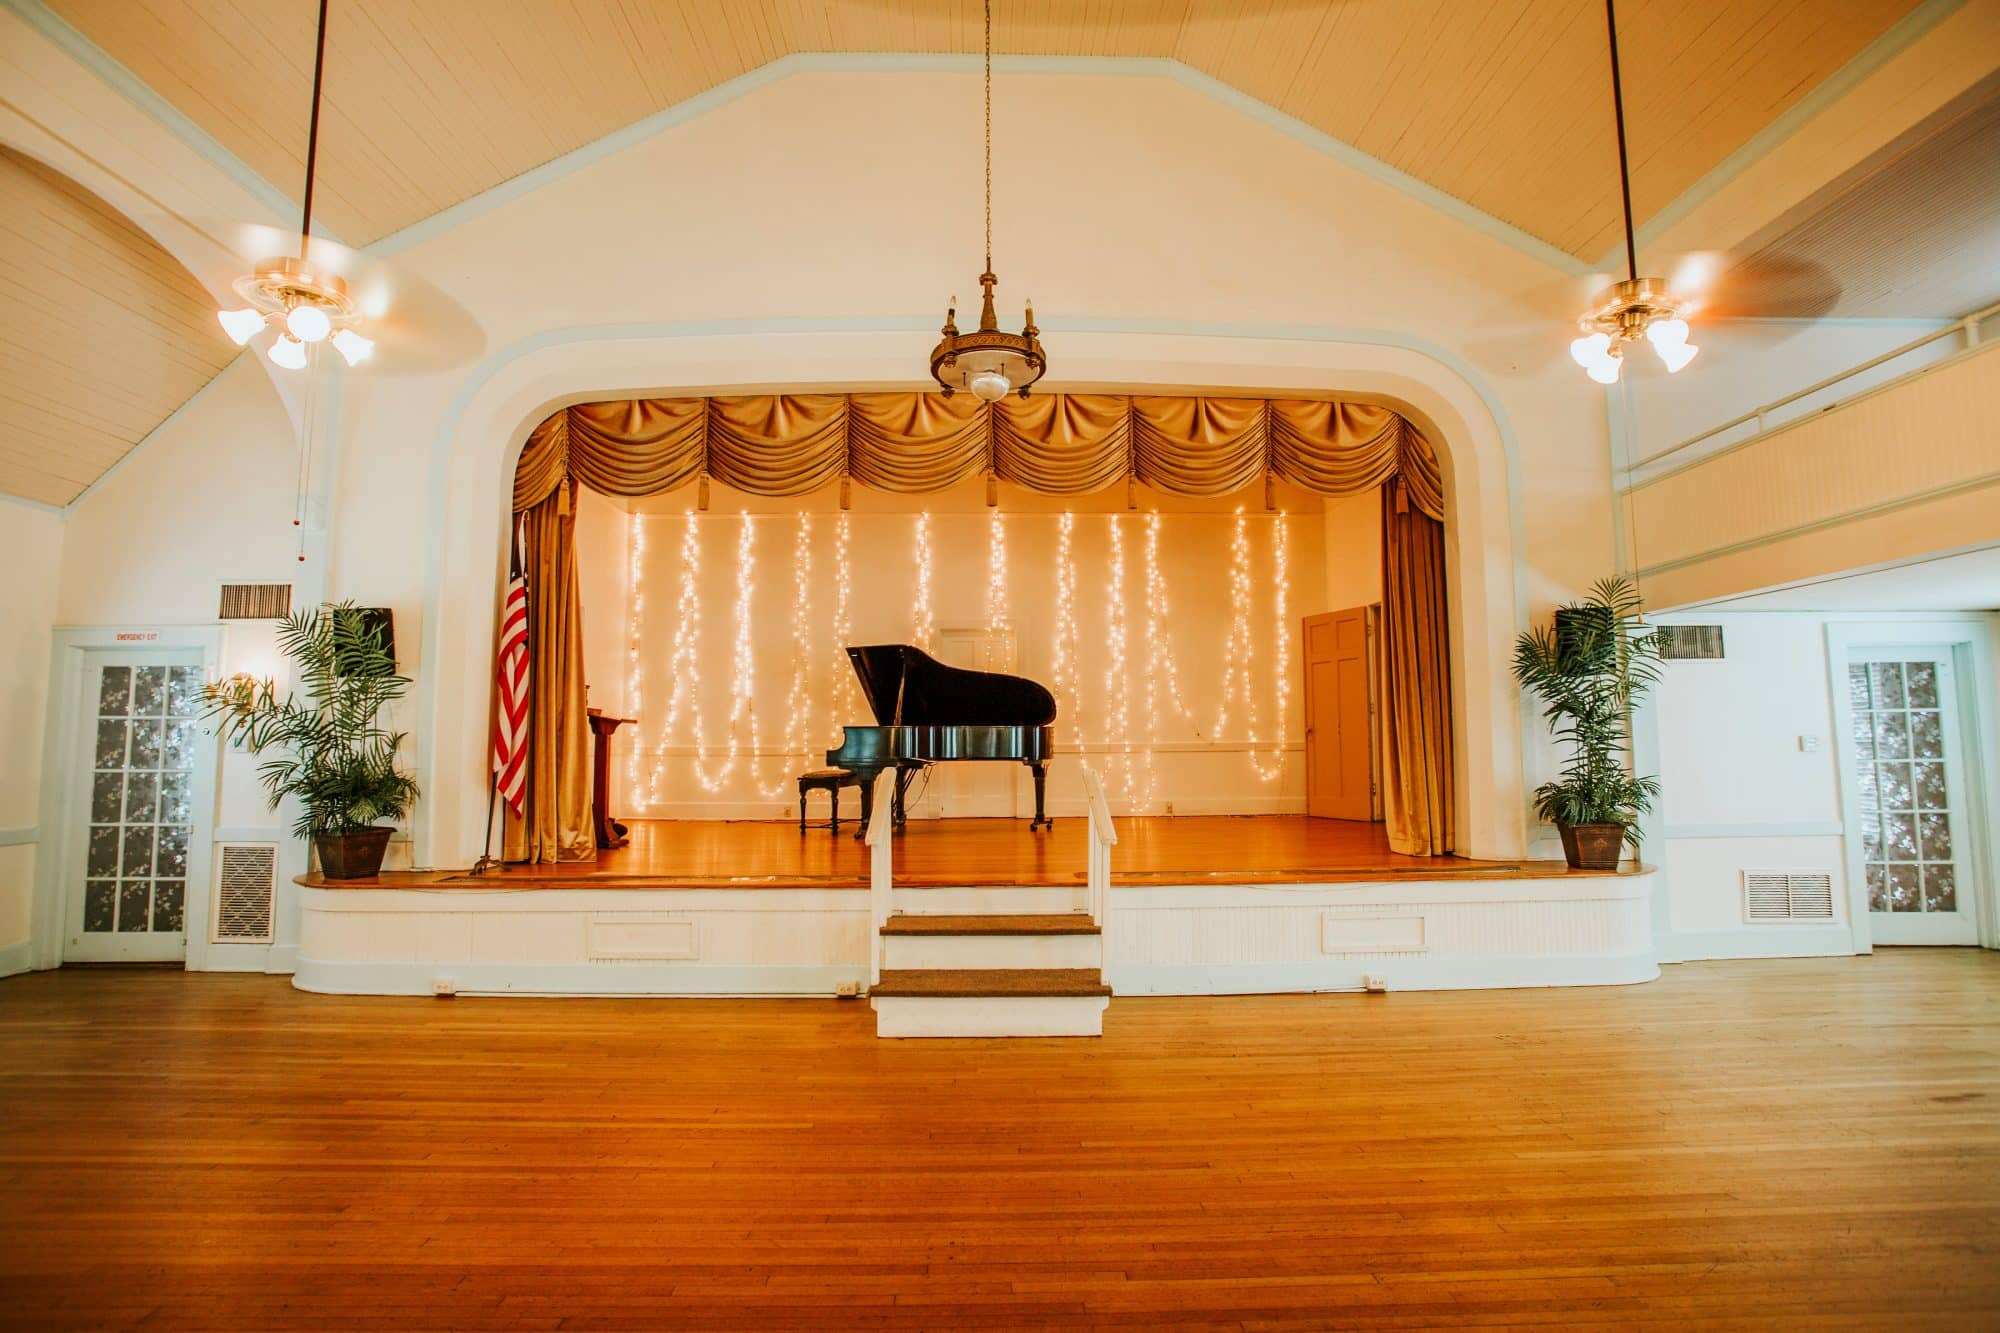 Women's Club of Sanford - reception hall with vaulted, arched ceilings, wood floors, and stage